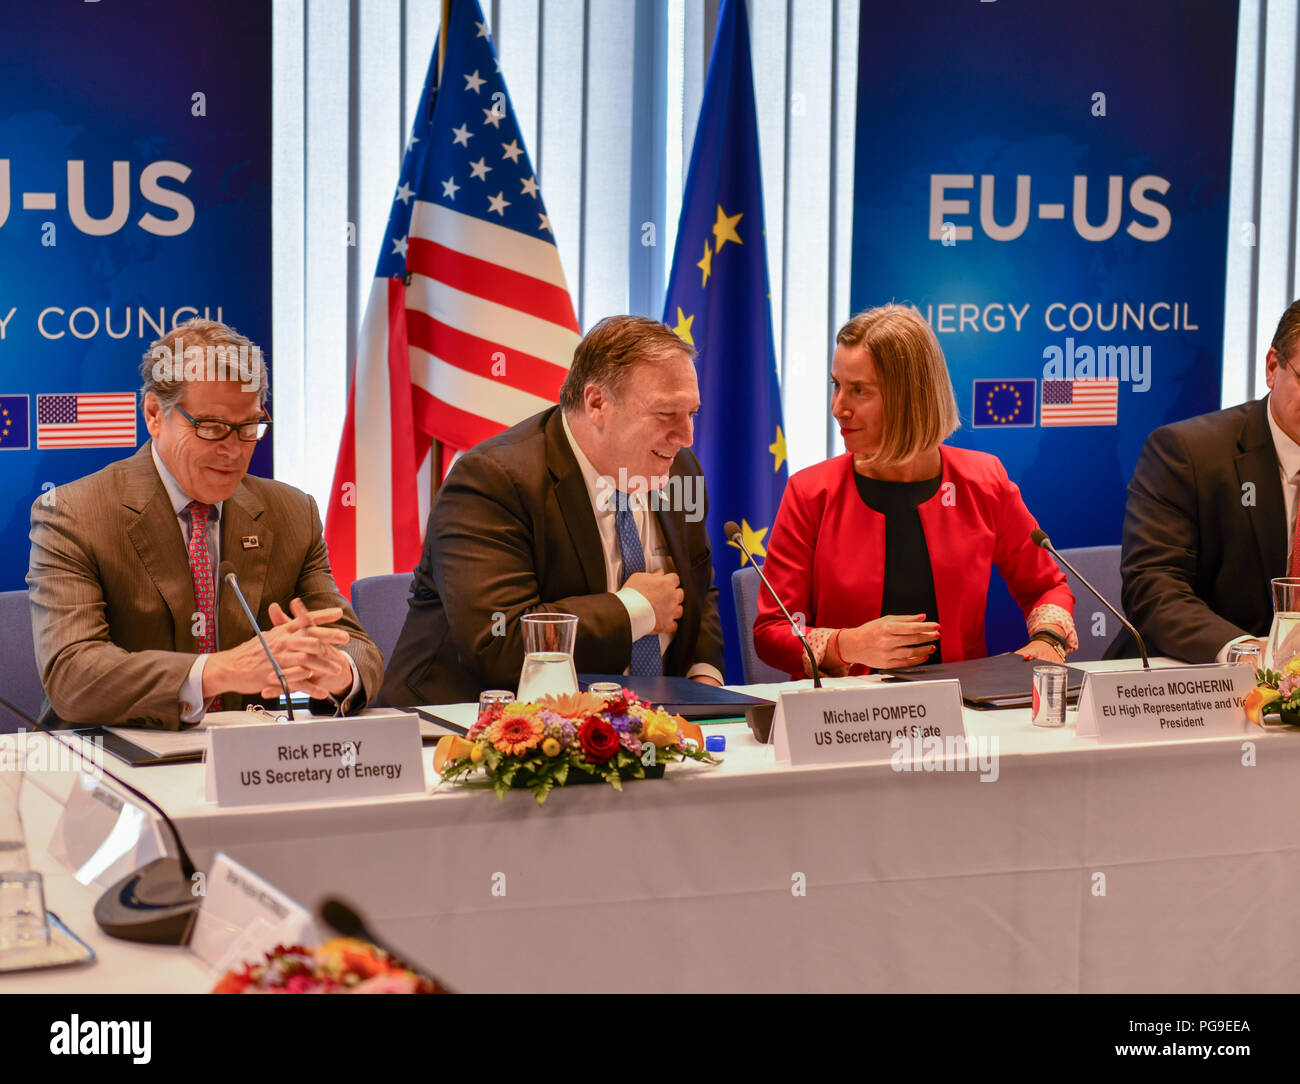 U.S. Secretary of State Michael R. Pompeo chats with U.S. Secretary of Energy Rick Perry and U.S. Representative to the European Union Federica Mogherini at the United States EU Energy Council meeting in Brussels, Belgium on July 12, 2018. Stock Photo